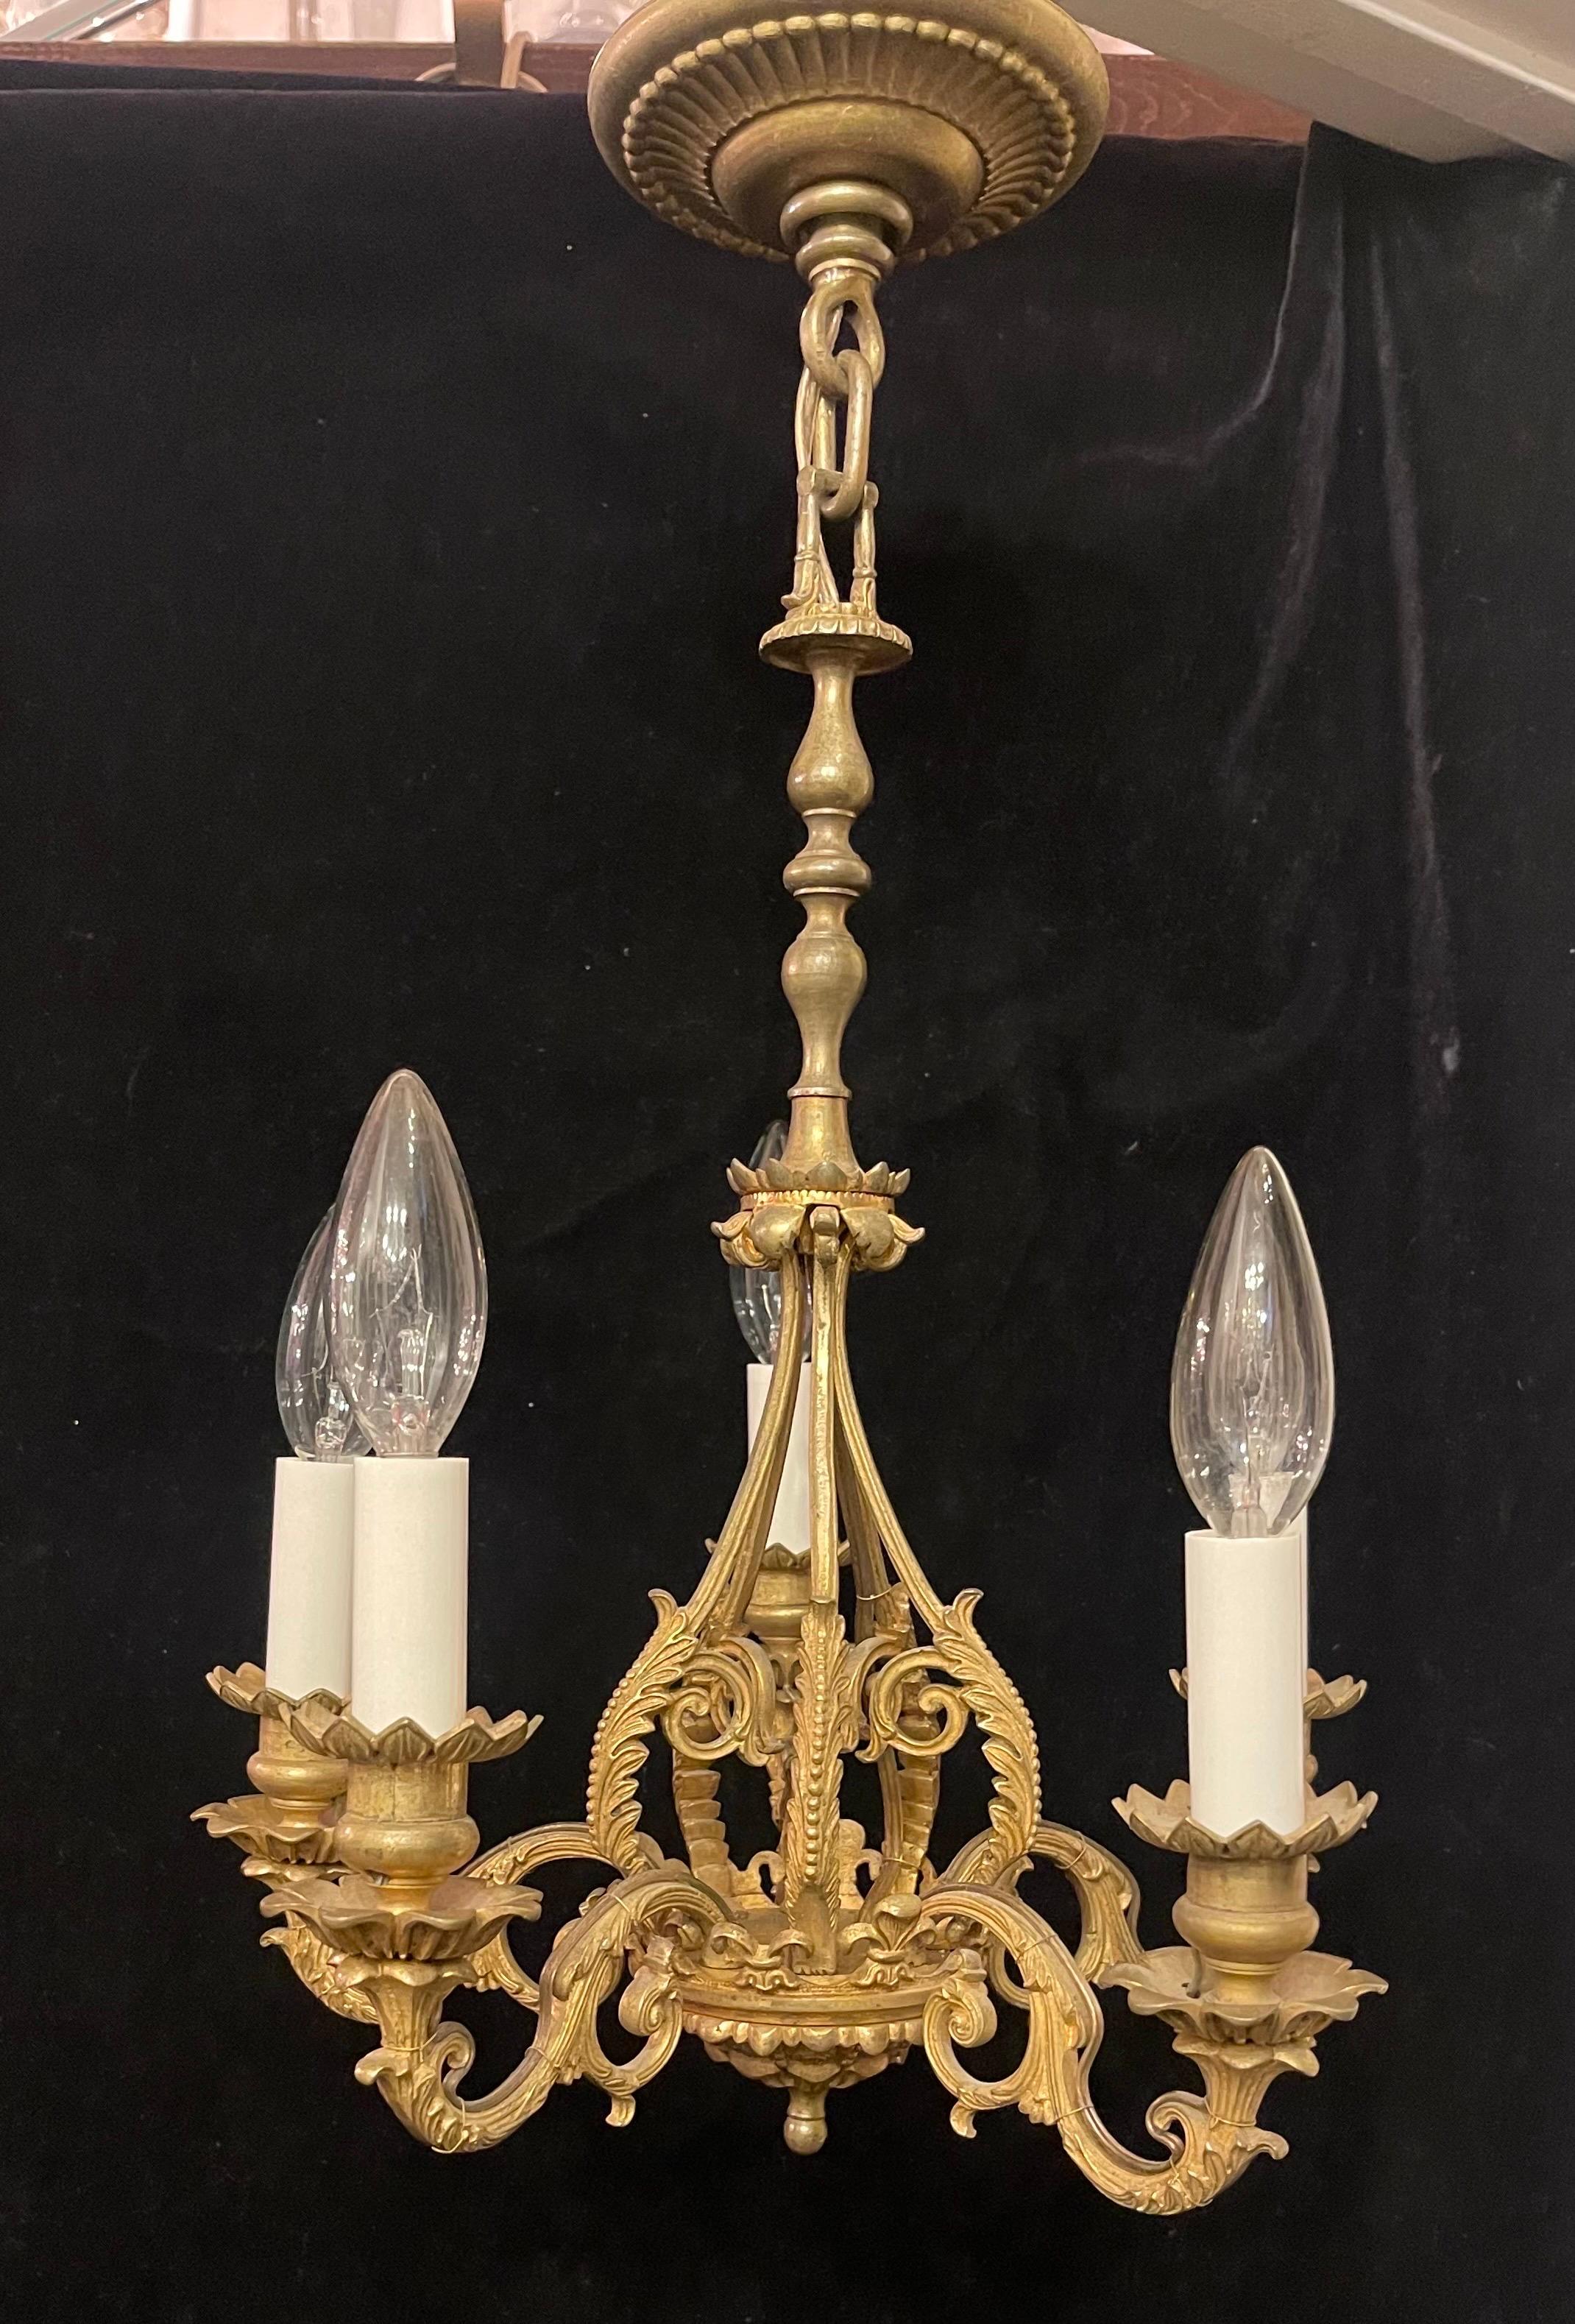 Wonderful French Empire Dore Bronze Regency Petite Five-Arm Chandelier Fixture In Good Condition For Sale In Roslyn, NY